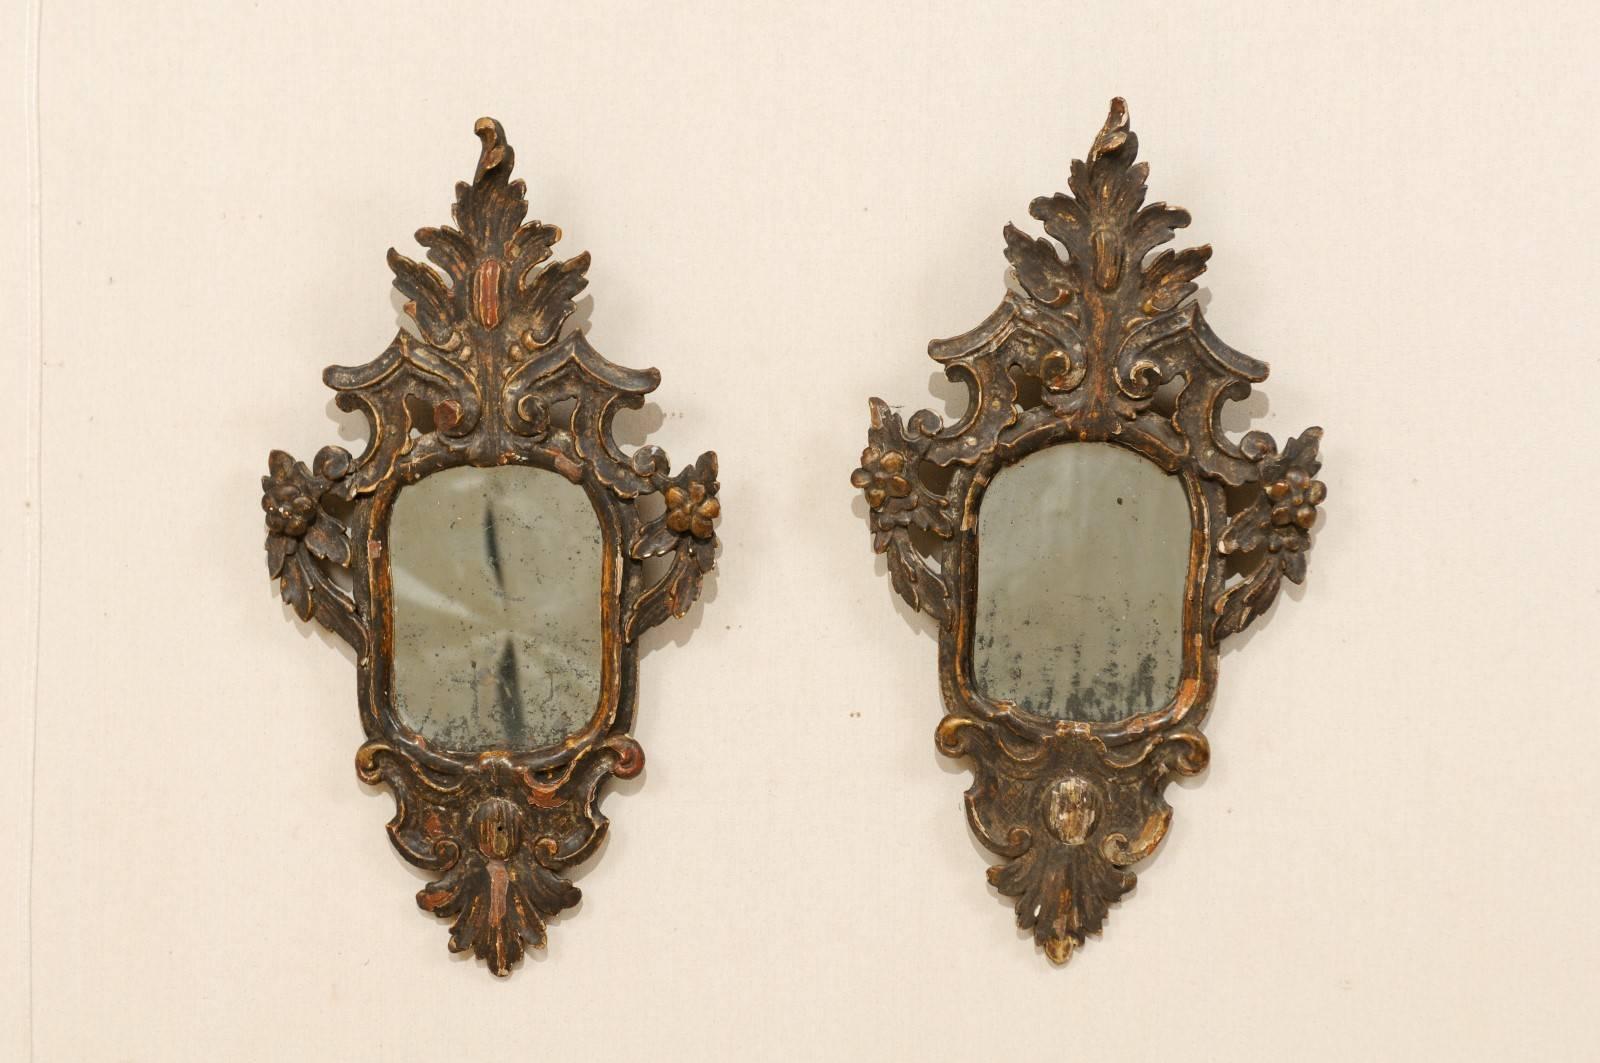 A pair of 18th century elegant Italian mirrors. This pair of Italian wooden Rococo style mirrors are beautifully carved in floral and leaf motifs. The crests and skirts are elongated and rich in detail. The mirrors are gesso over wood and gilding,